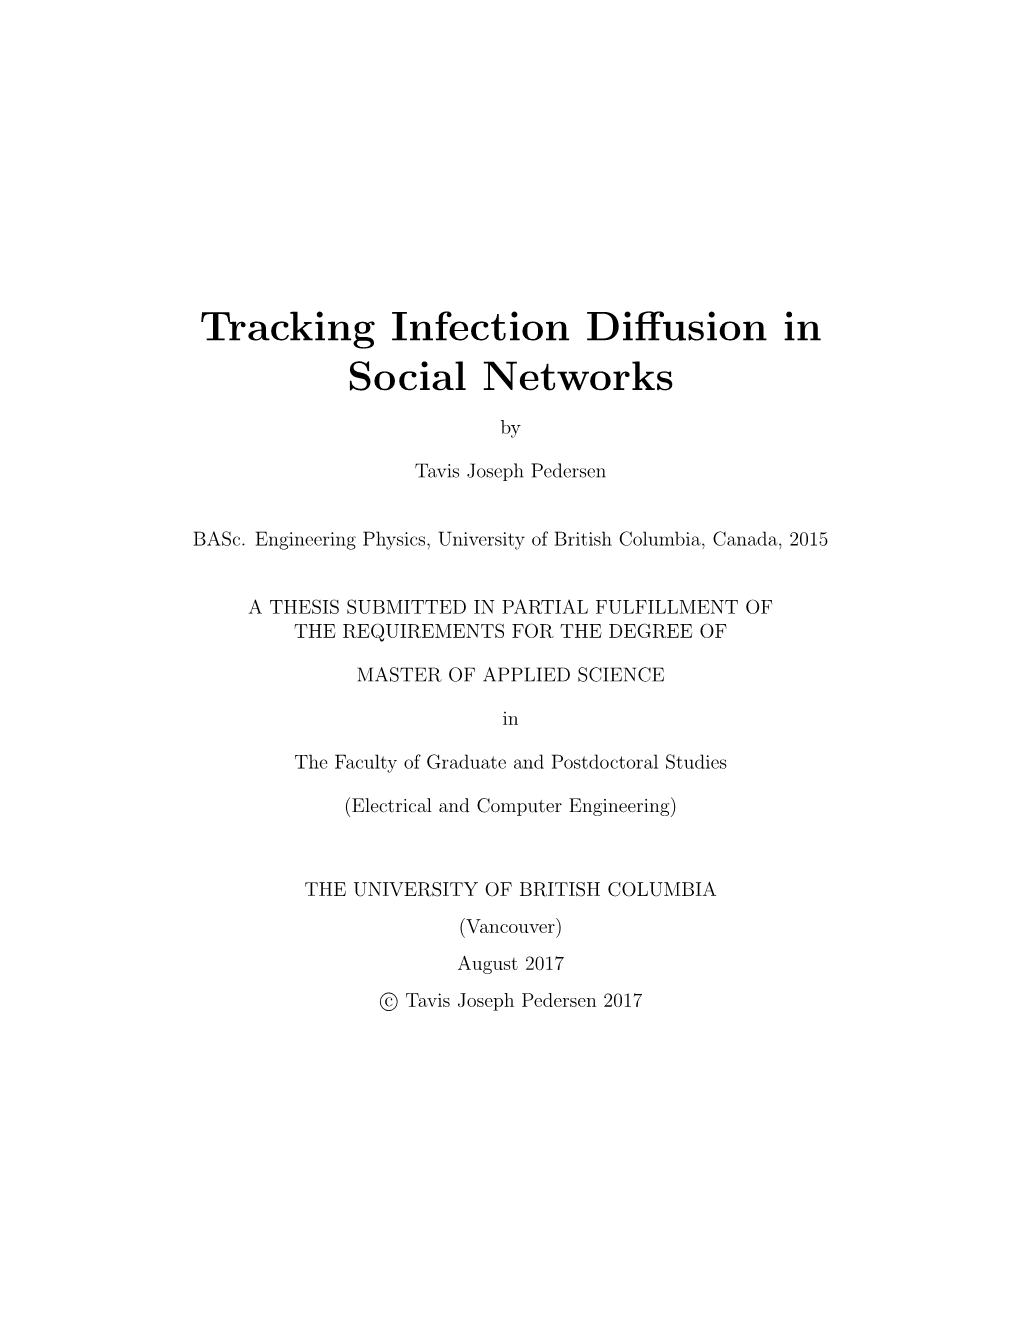 Tracking Infection Diffusion in Social Networks